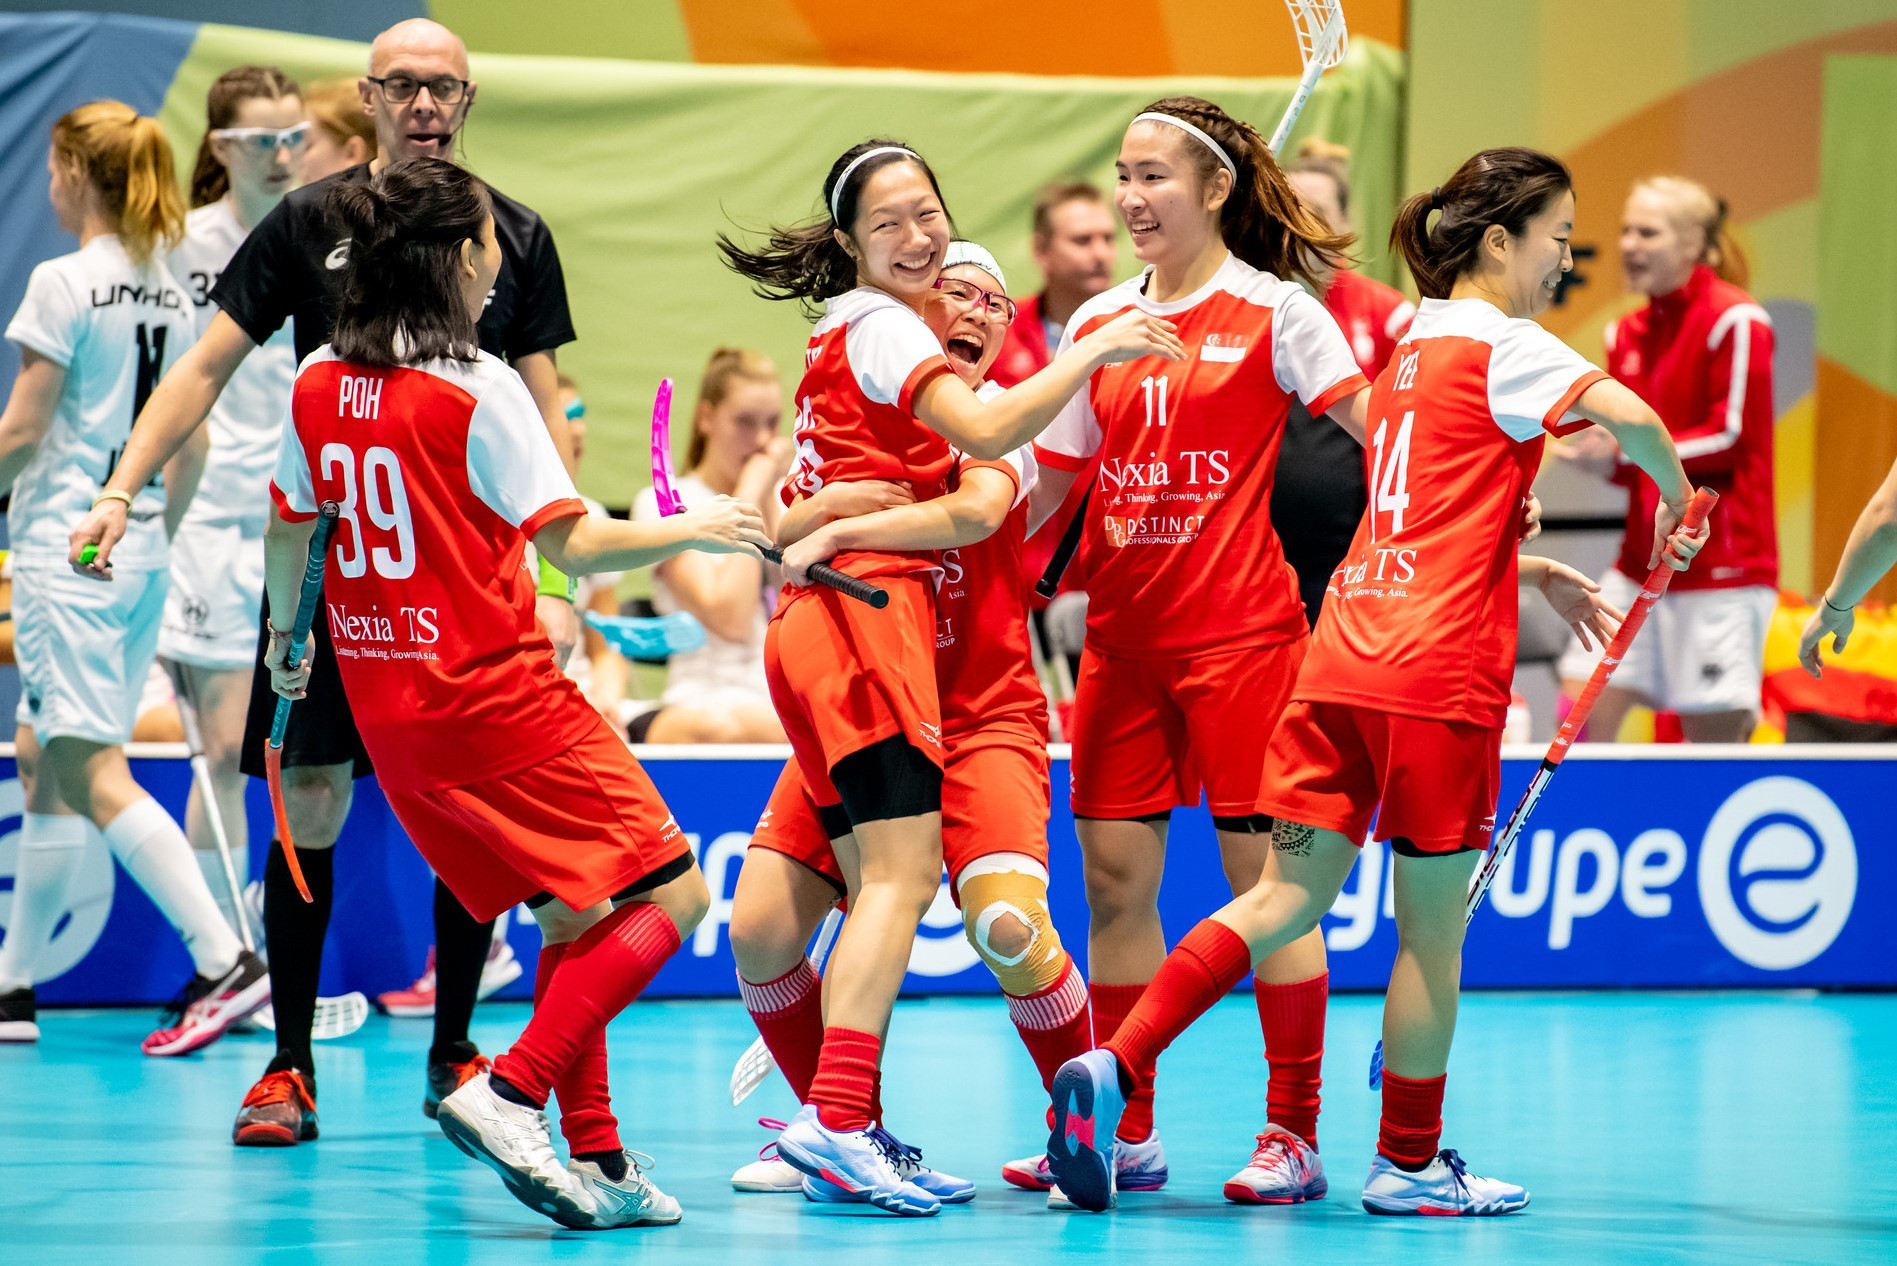 Singapore was awarded the hosting rights for the 2023 Women's World Floorball Championships ©Getty Images